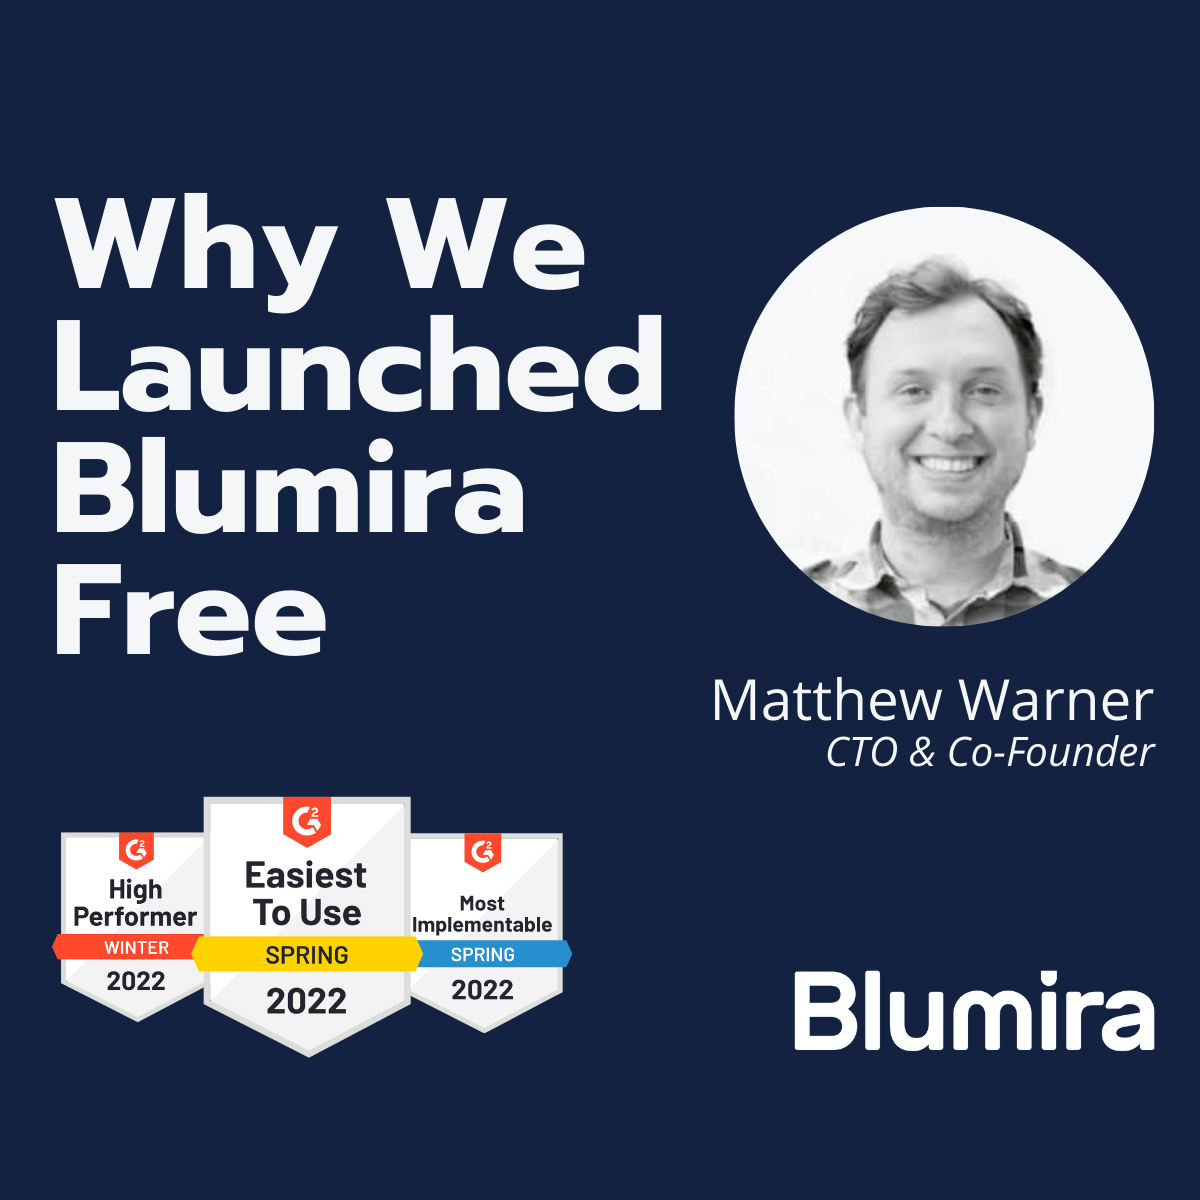 Why Blumira Launched a Free SIEM